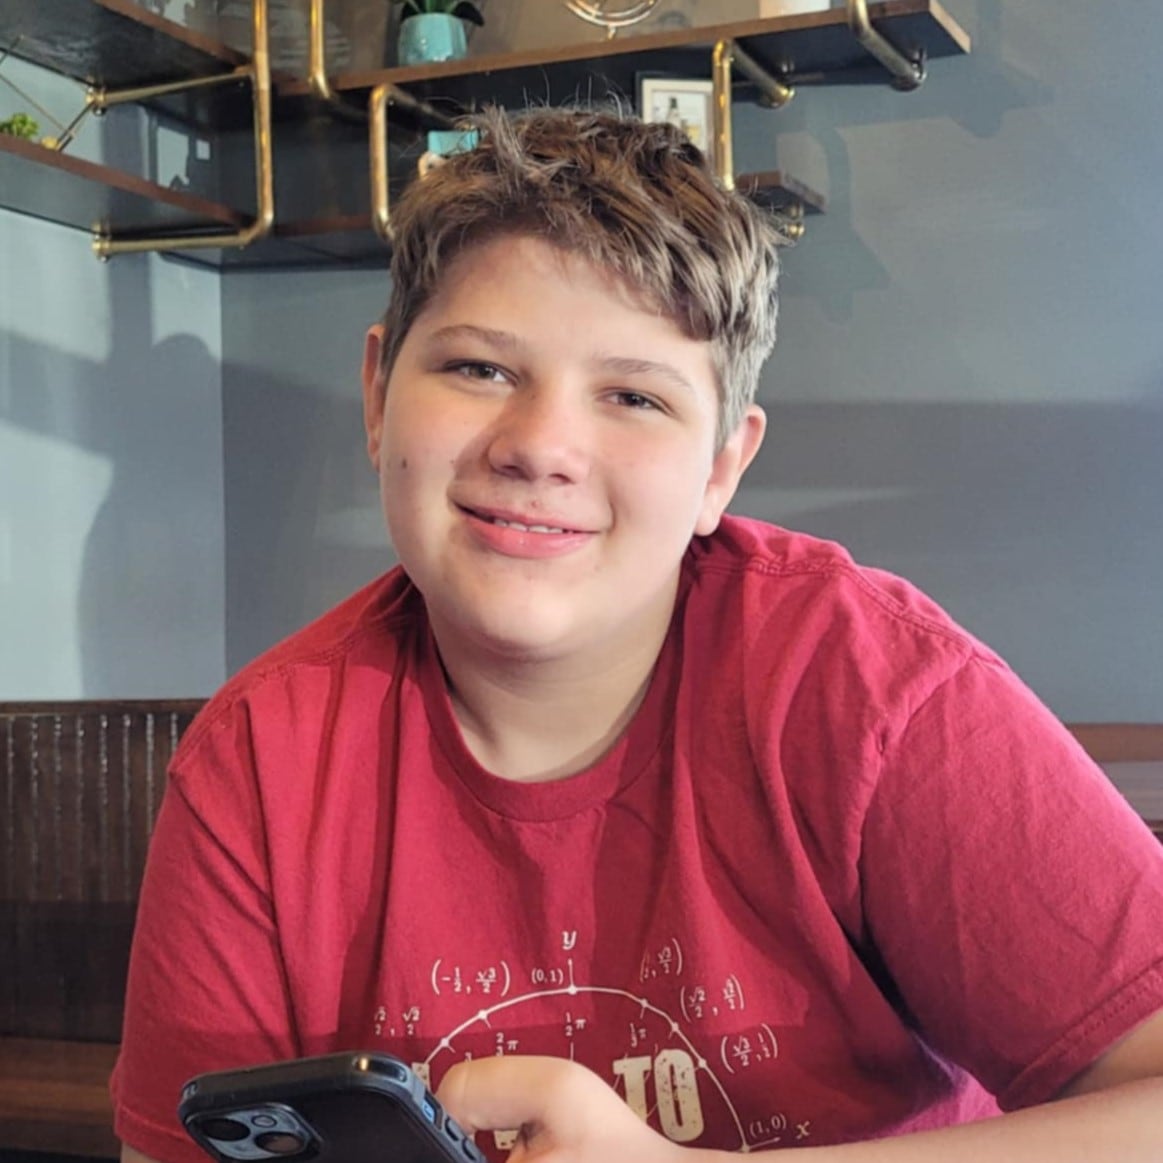 Joliet 11-year-old will teach at tech conference for 2nd time